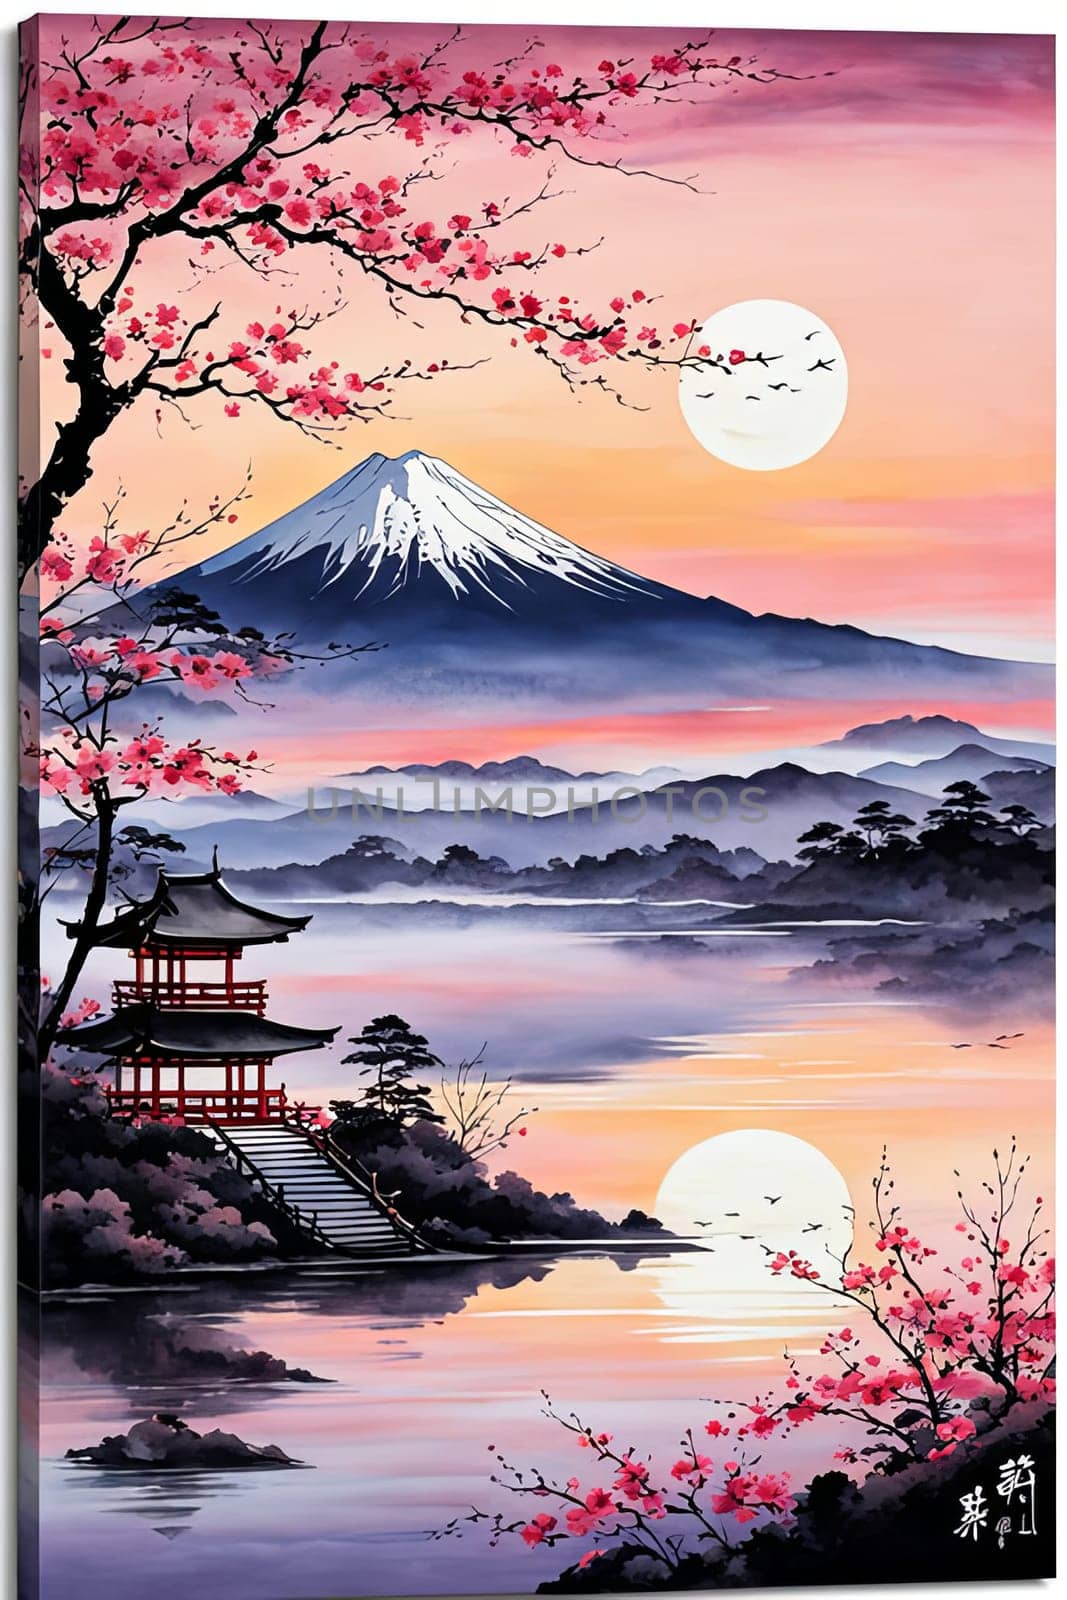 Traditional Japanese pagoda with iconic Mount Fuji in background, capturing essence of Japans natural beauty, cultural heritage. For interior, commercial spaces to create stylish atmosphere, print